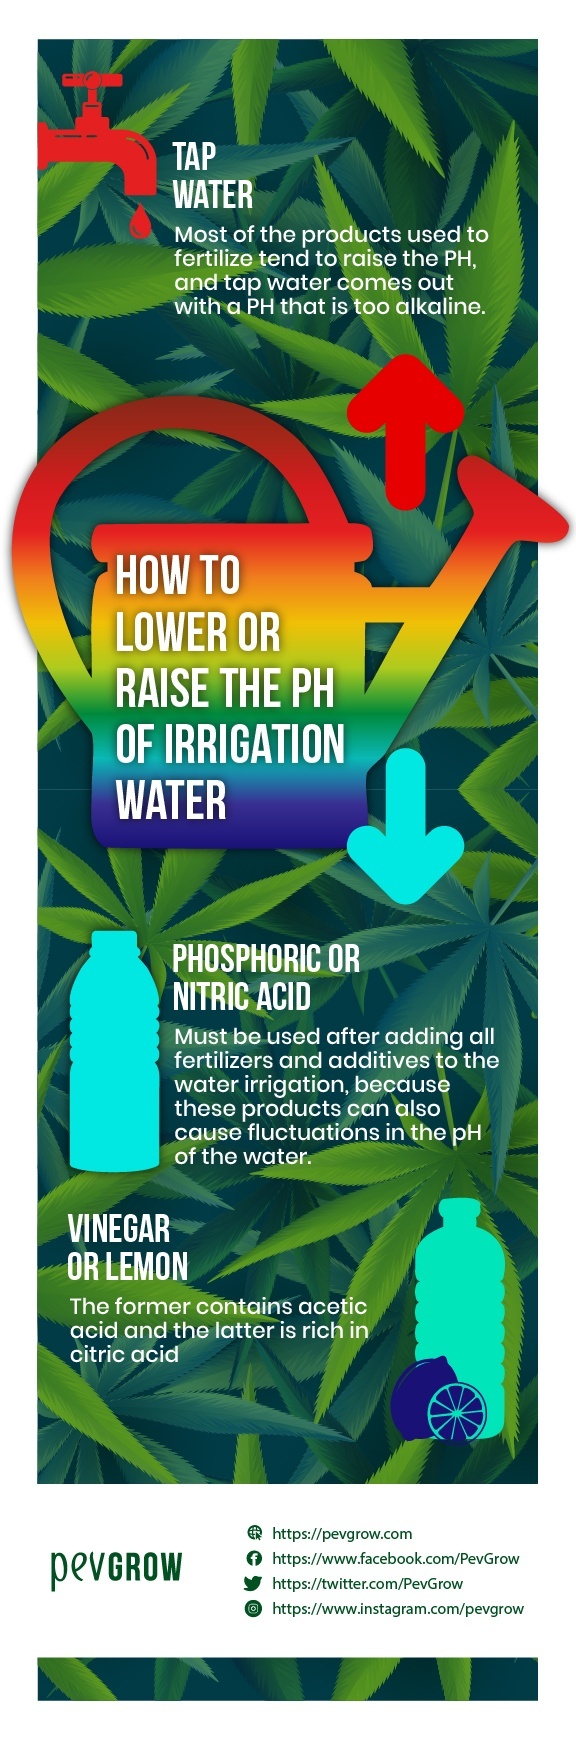 Infographic summarising how to lower or raise the pH of irrigation water.